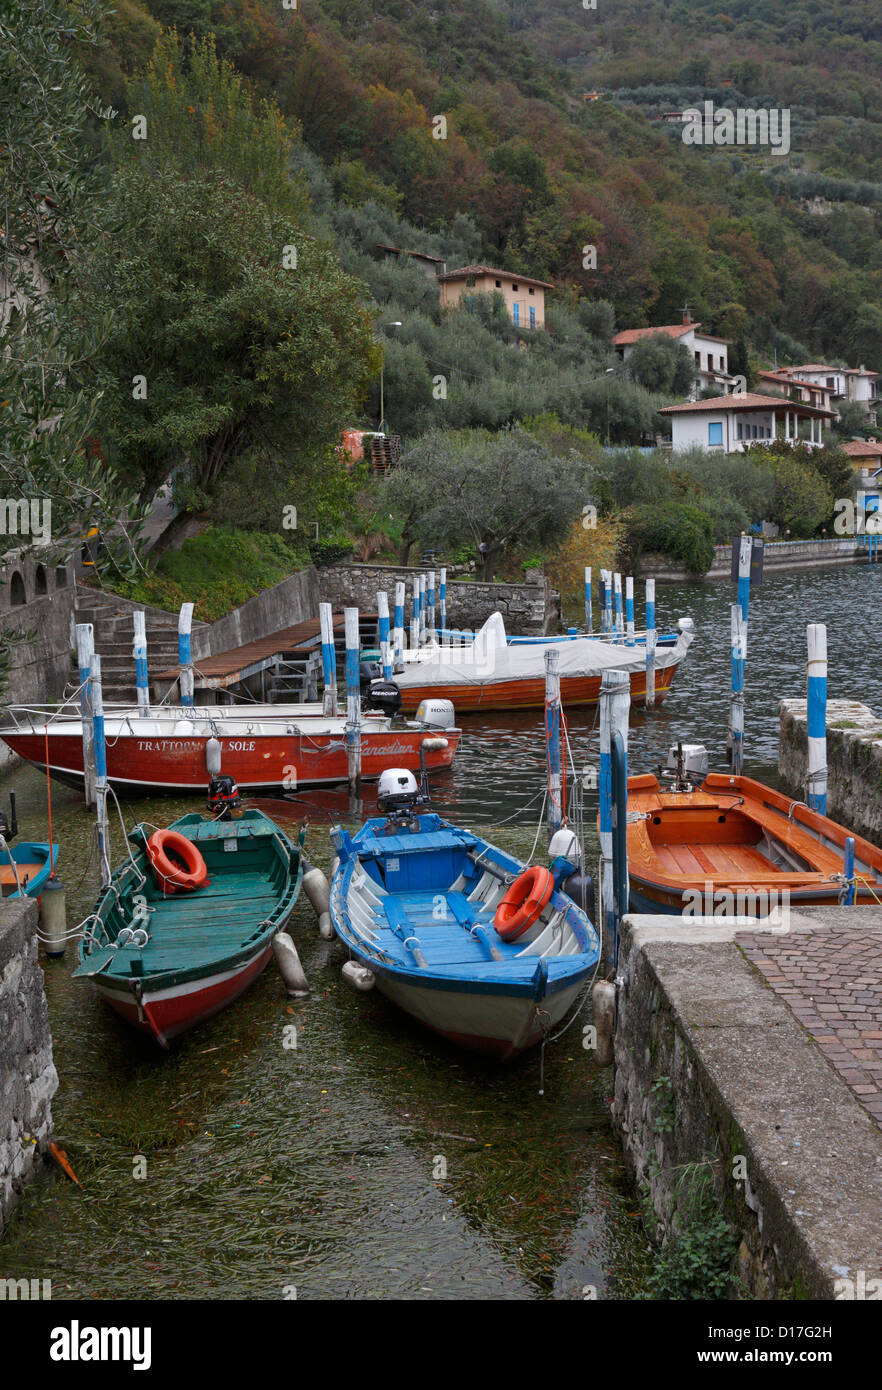 Boats in a small harbour in Monte Isola on Lake Iseo near Bergamo, Lombardy, Italy, Europe. Stock Photo